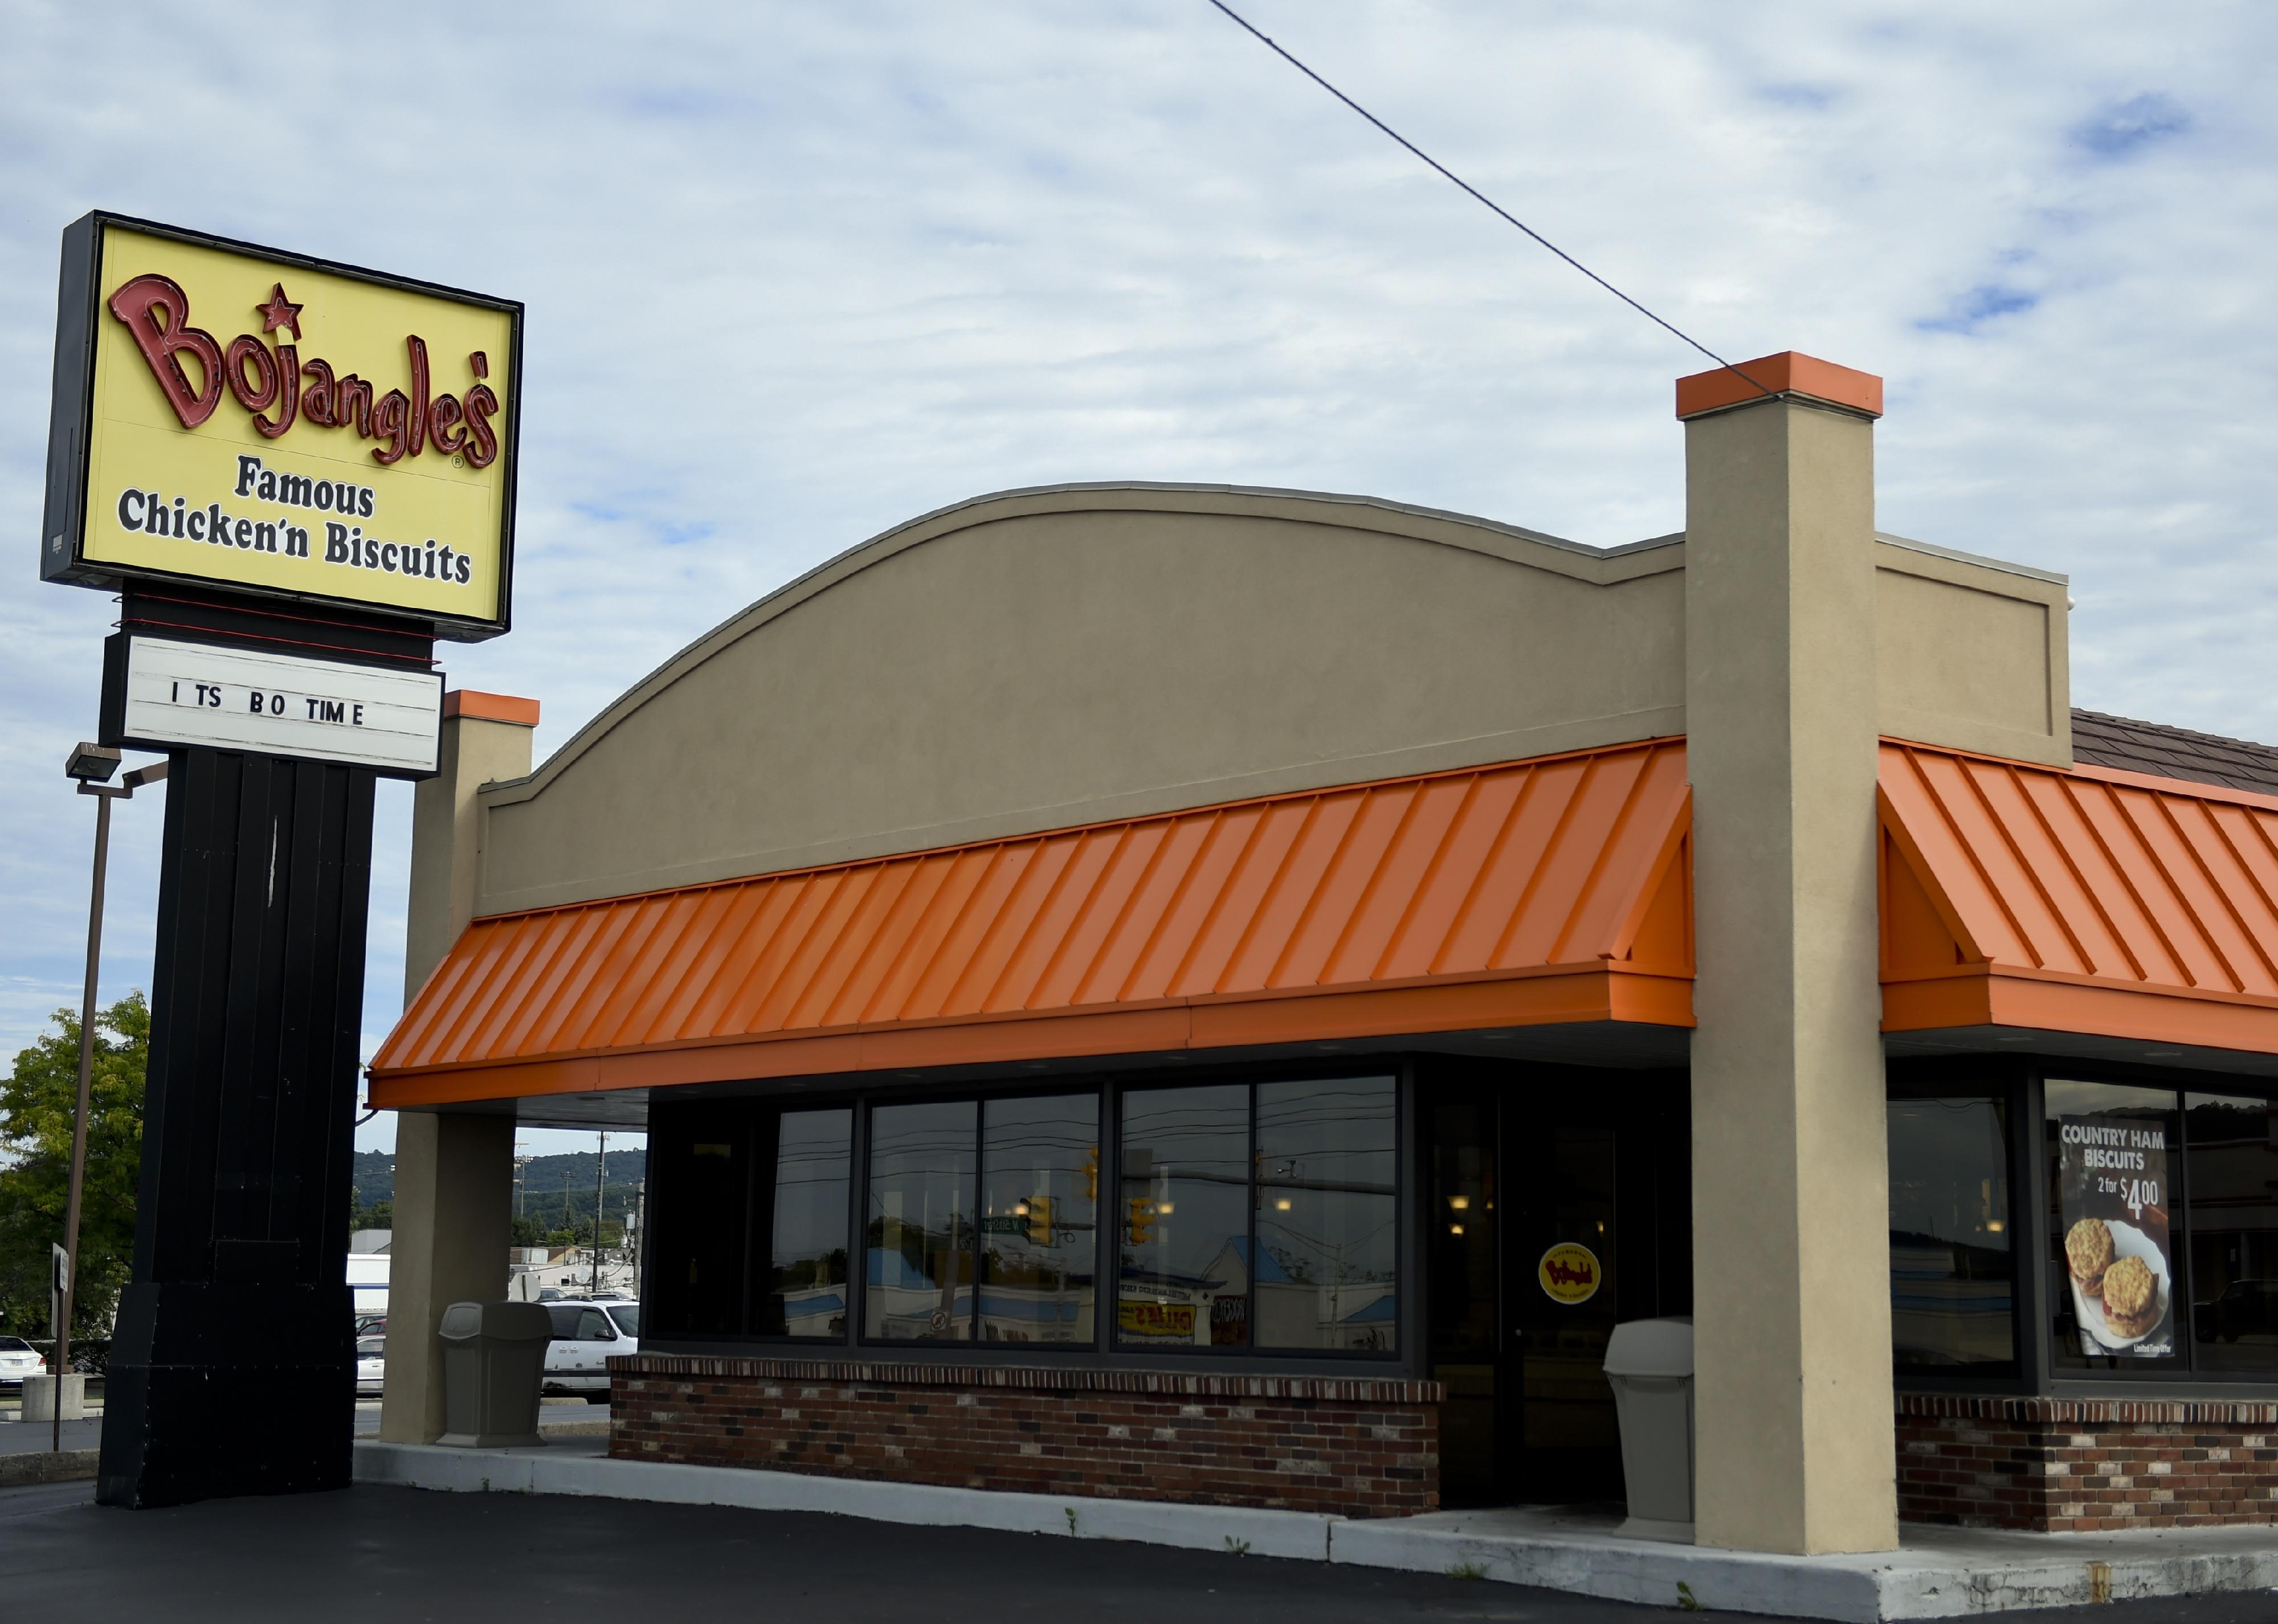 A Bojangle's restaurant with an orange awning and yellow sign.